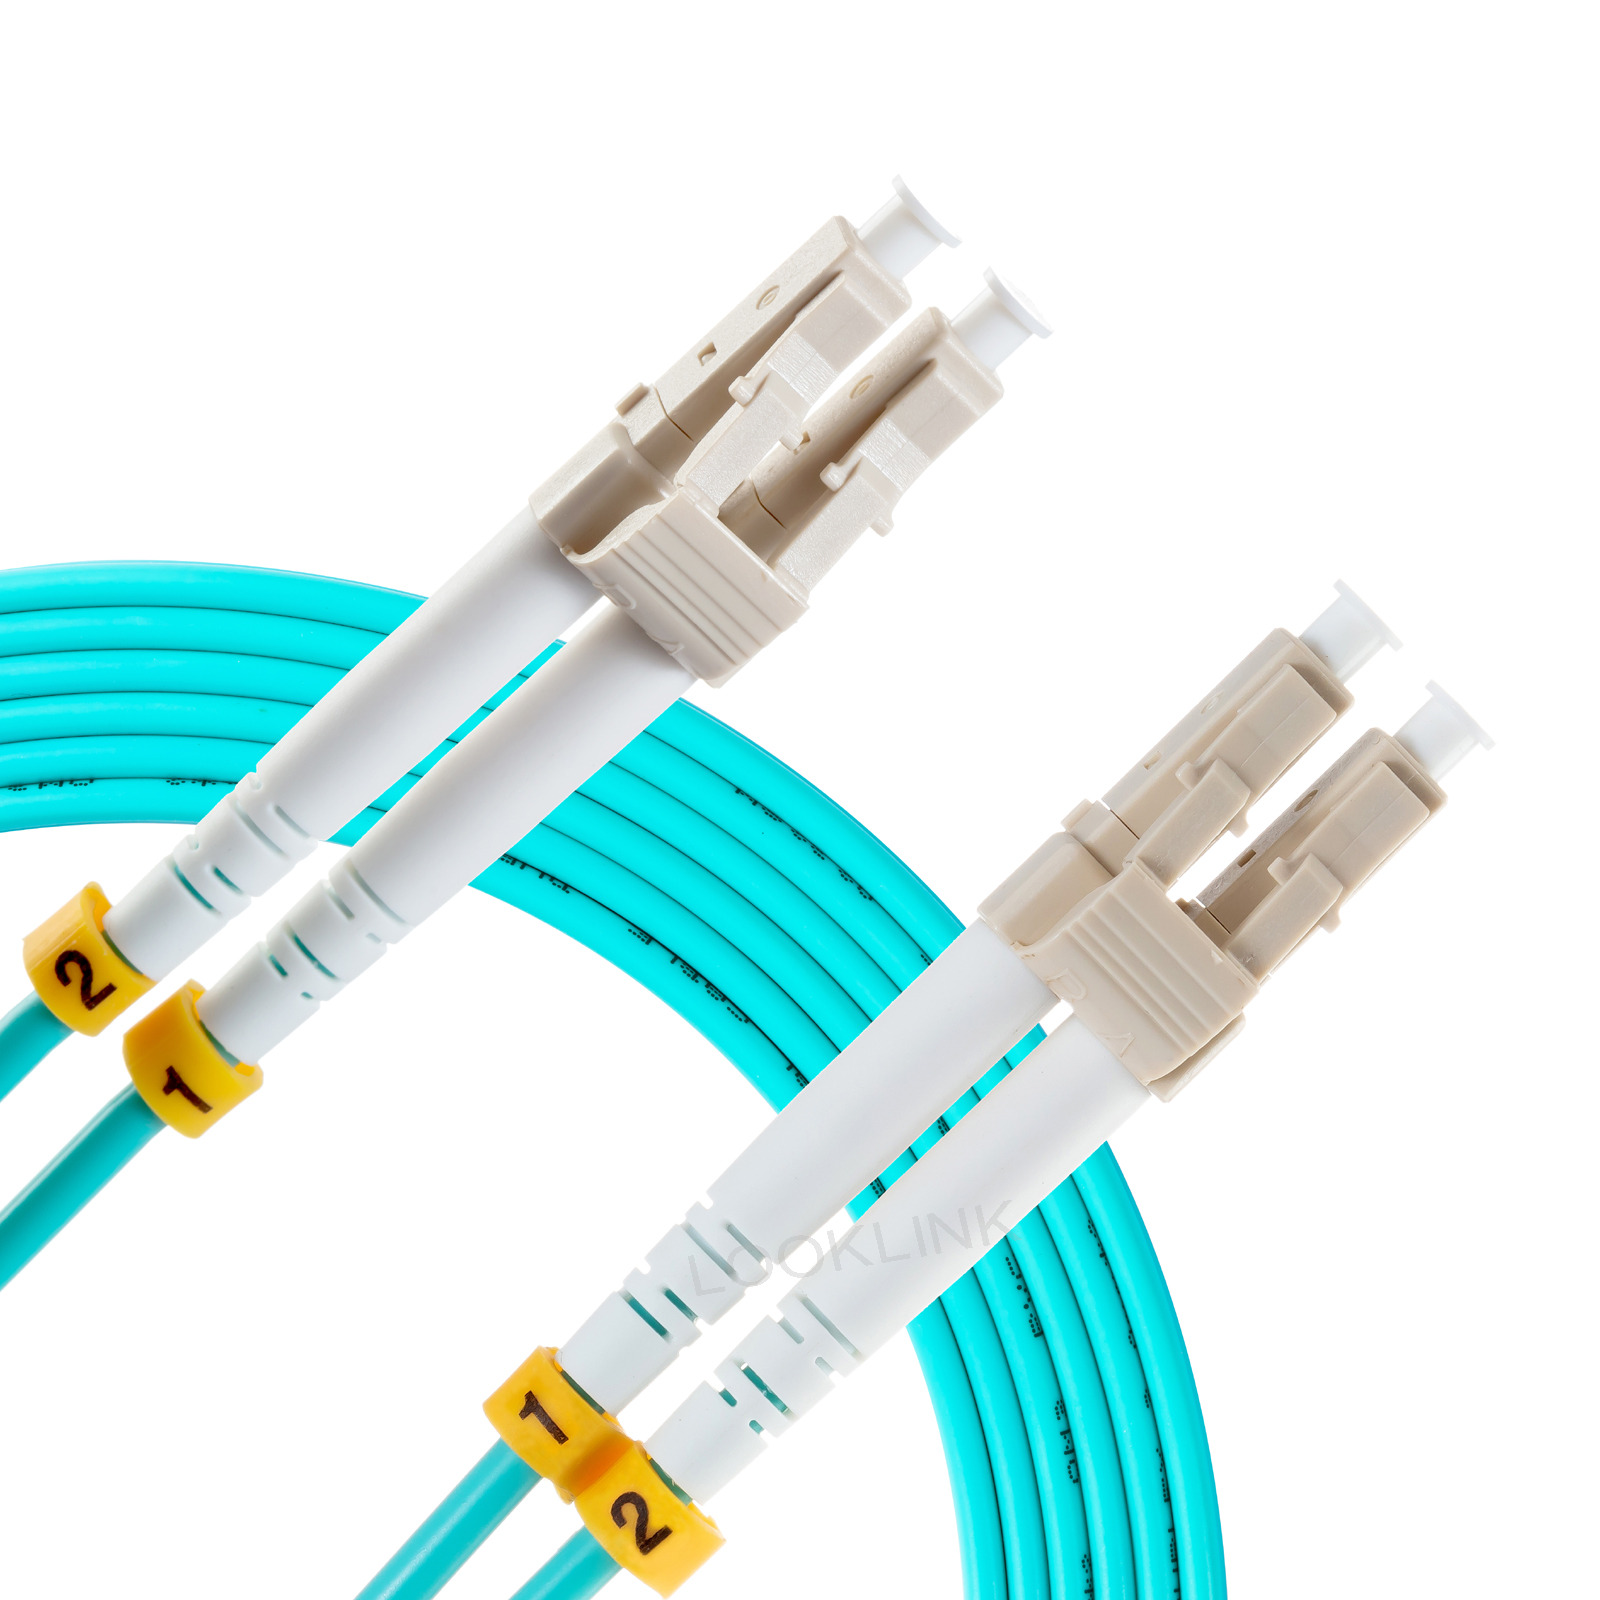 10M-30M Length 10G-50/125 OM3 Multimode Duplex LC to LC Fiber Optic Patch Cable